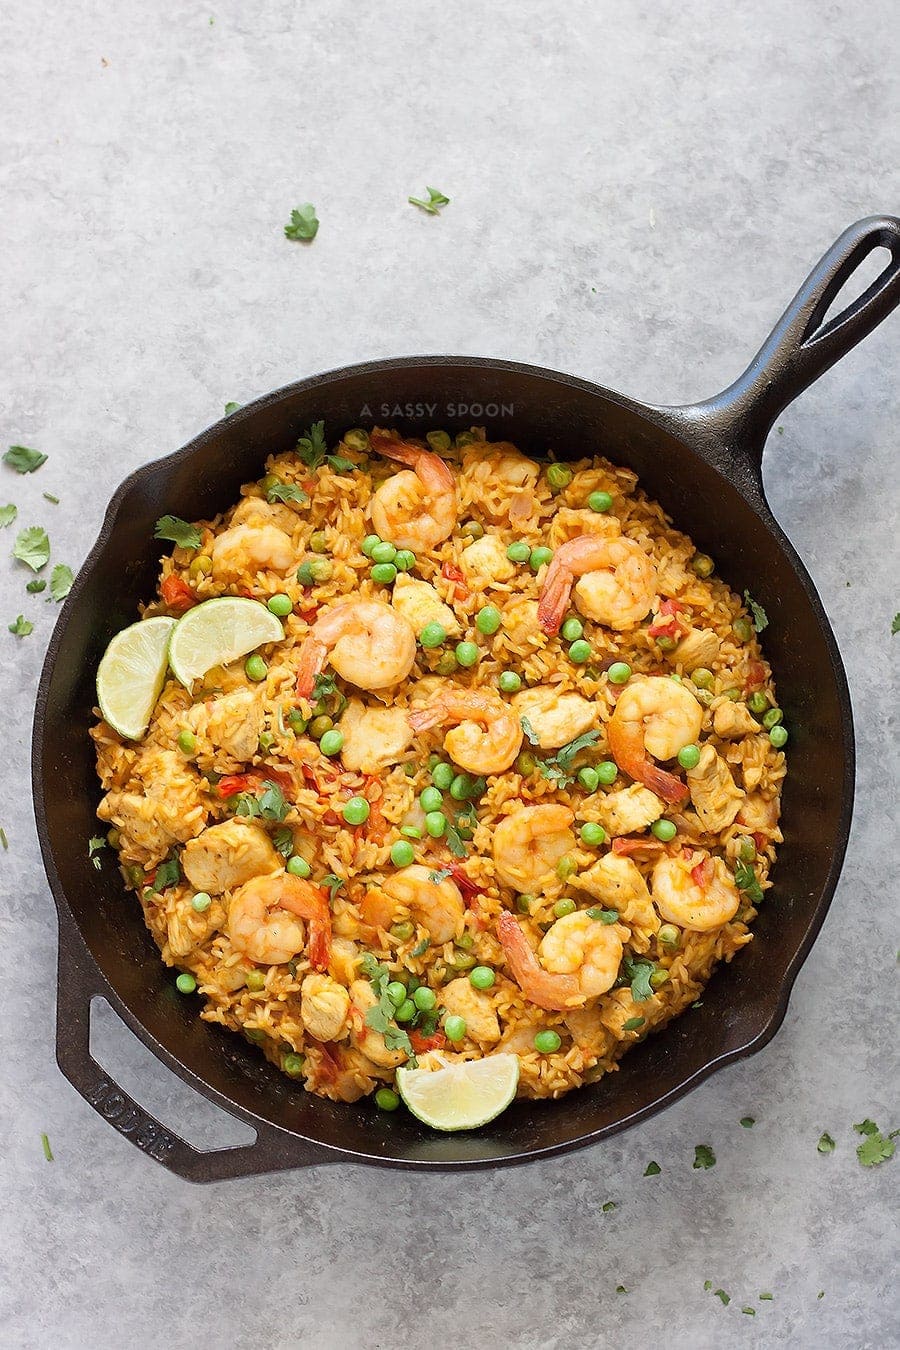 Brown rice, chicken, shrimp, and turmeric placed in an iron skillet